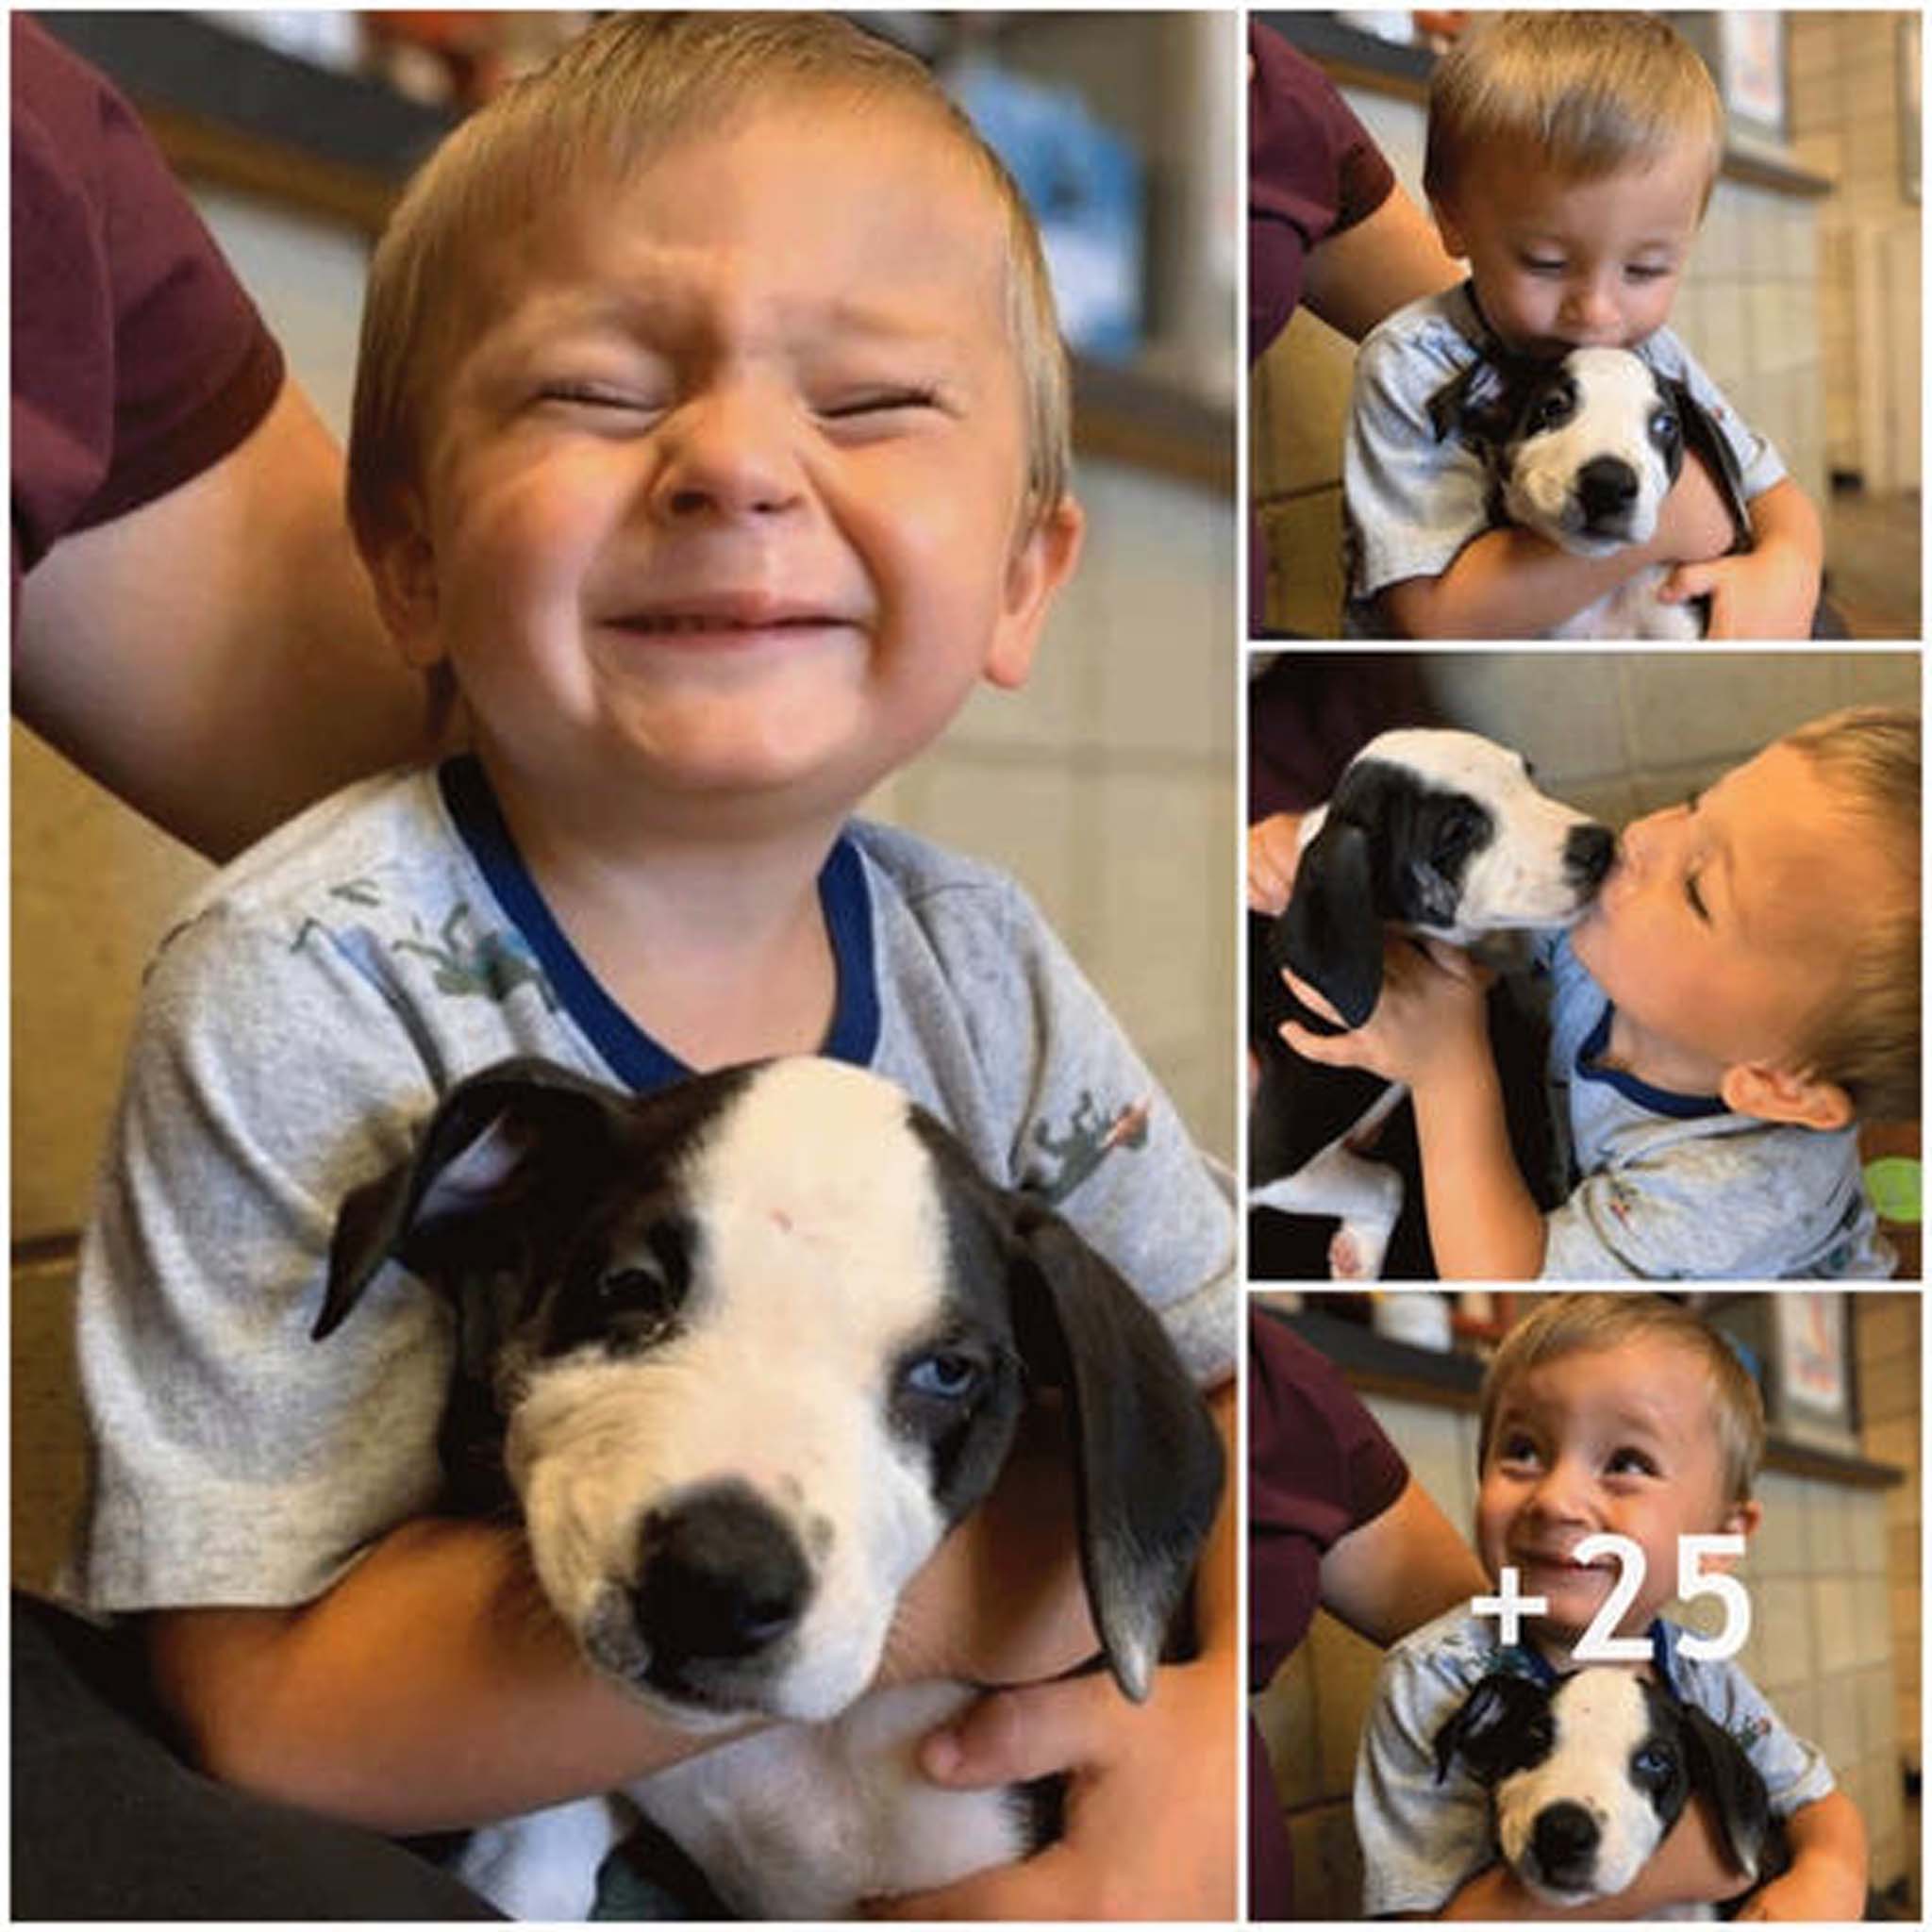 To Discover Optimism and Empathy in Each Other: A Boy with a Cleft Lip Adopts a Dog with a Cleft Lip Like Him.